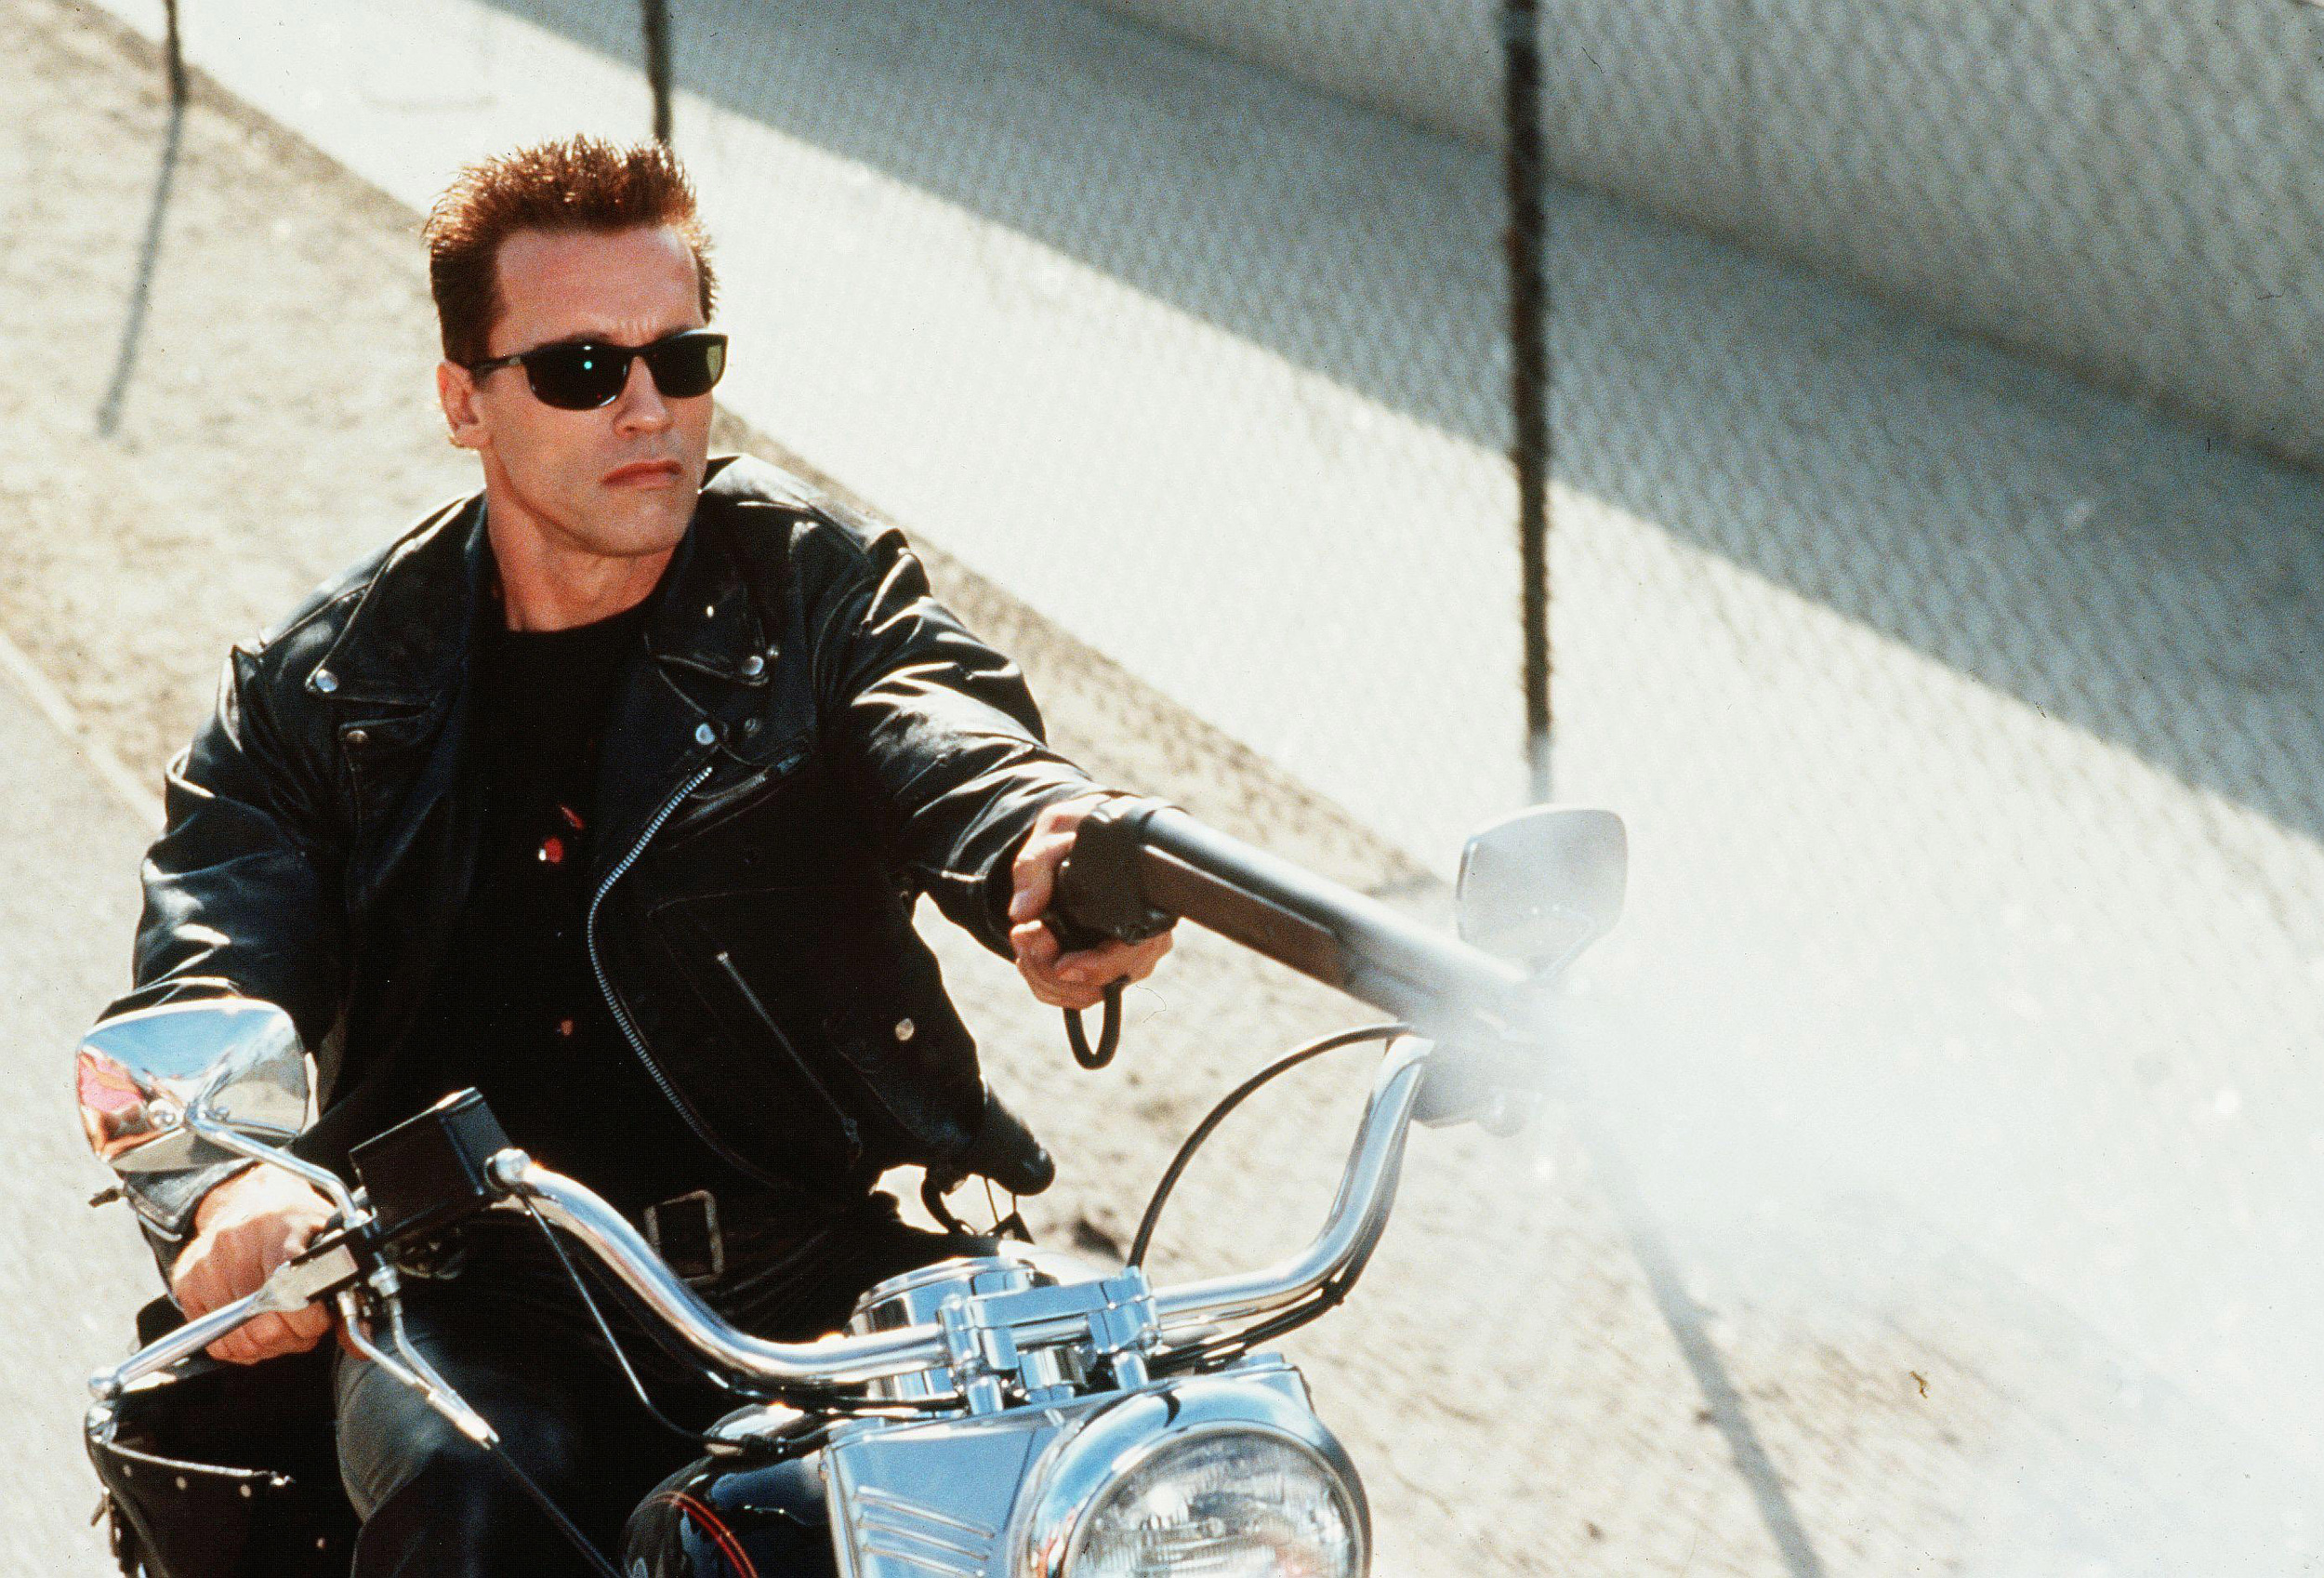 <p>This time around, we had to go with a sequel in a series. <em>The Terminator</em> is a good movie, but a bleak horror film. <em>Terminator 2</em> got a bigger budget and a much larger scope. It’s an epic ‘90s action film, the one that really made this a franchise with legs. It also helped take Arnold Schwarzenegger’s career to the next level.</p><p>You may also like: <a href='https://www.yardbarker.com/entertainment/articles/the_most_successful_spinoffs_of_famous_movie_franchises_013124/s1__26561069'>The most successful spinoffs of famous movie franchises</a></p>